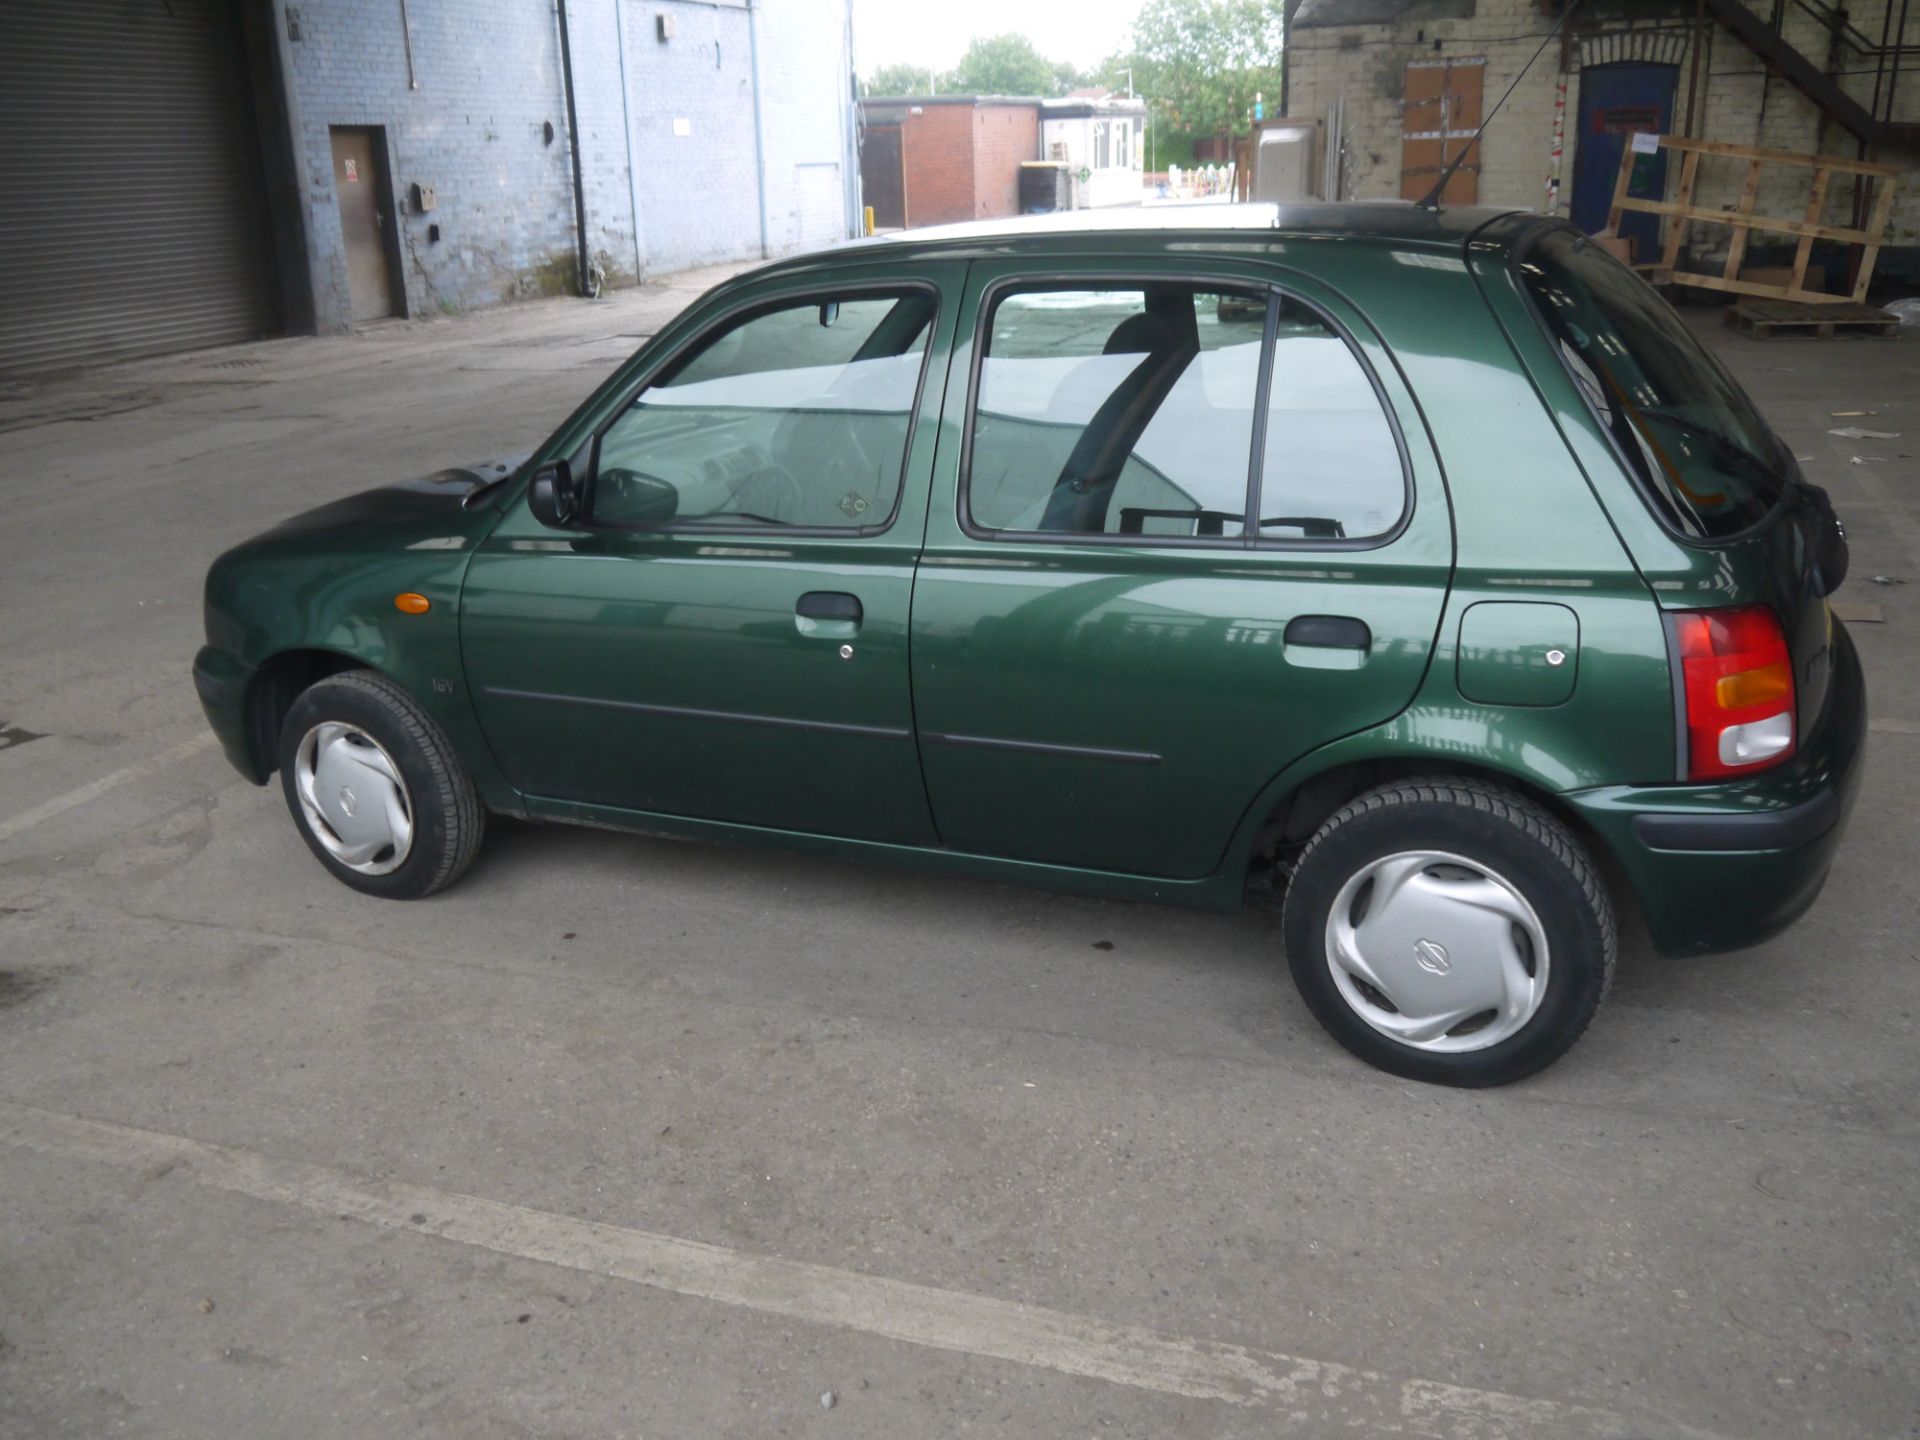 S Reg Nissan Micra, 5 door hatch back, 85,000miles, 1ltr Petrol.  In excellent condition for age. - Image 5 of 8